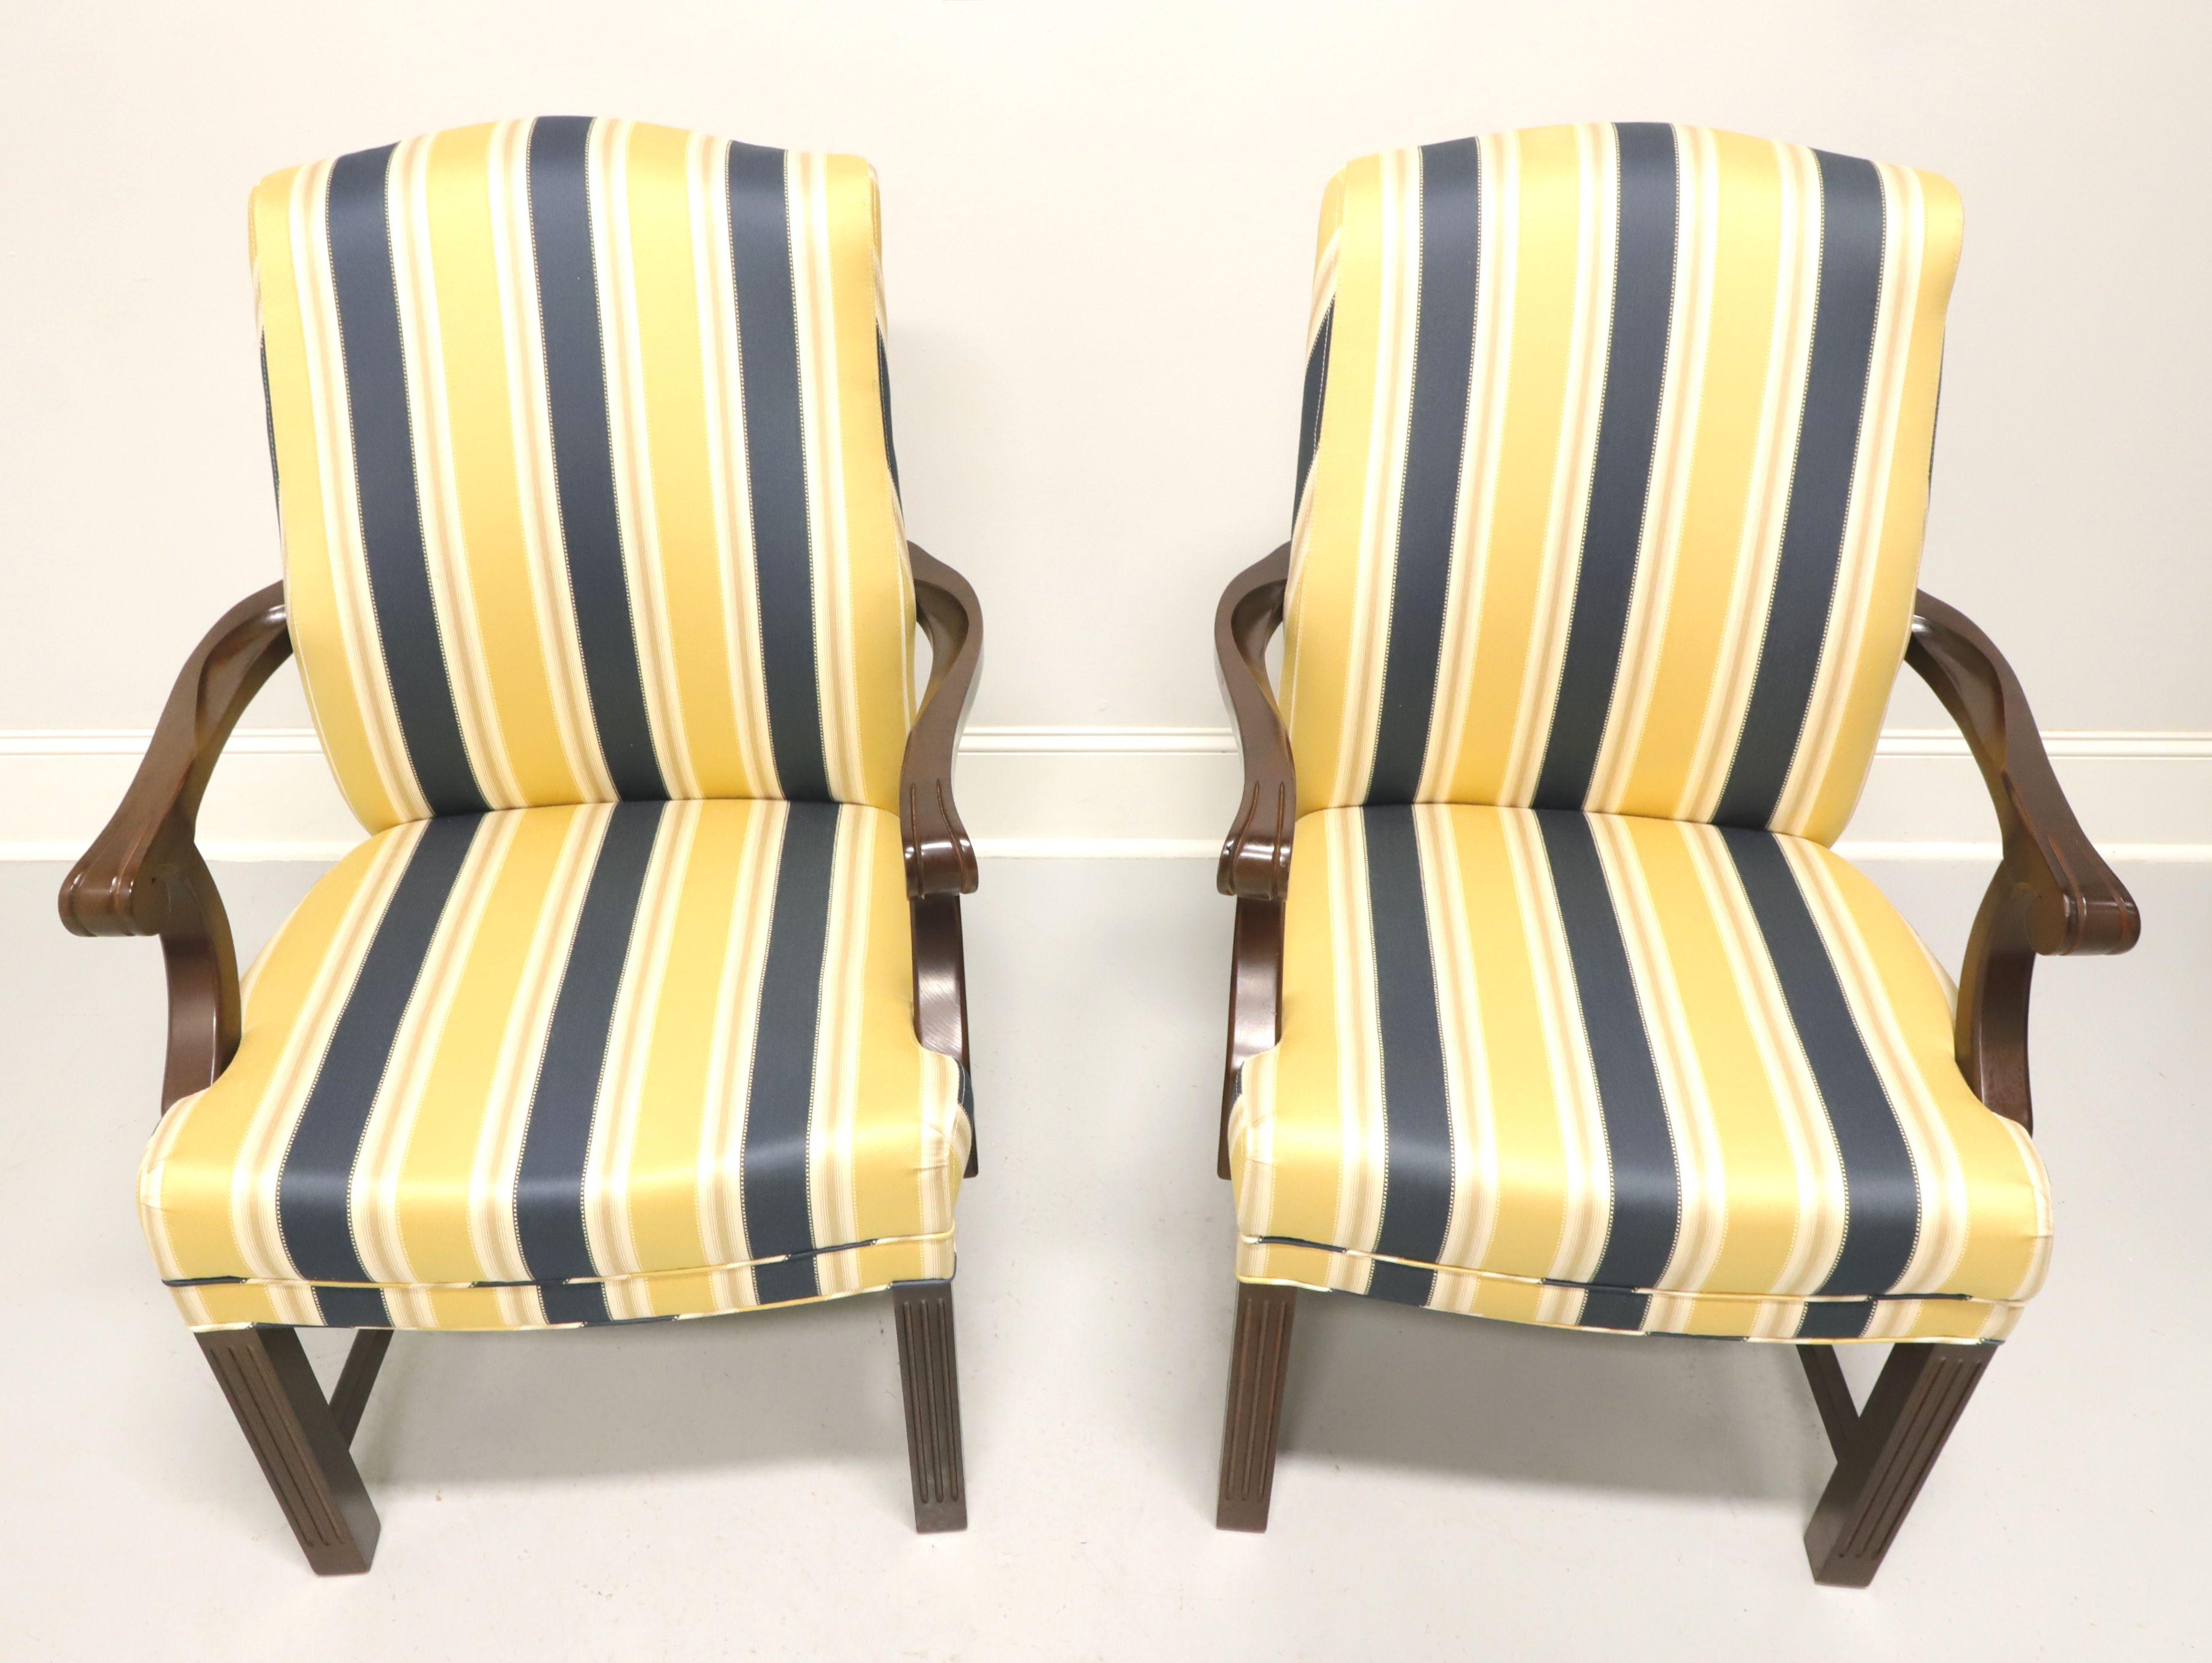 A pair of Chippendale style upholstered armchairs by Patrician Furniture. Navy blue, yellow and white striped fabric upholstery on a mahogany frame with straight legs and stretcher base. Made in High Point, North Carolina, USA, in the late 20th